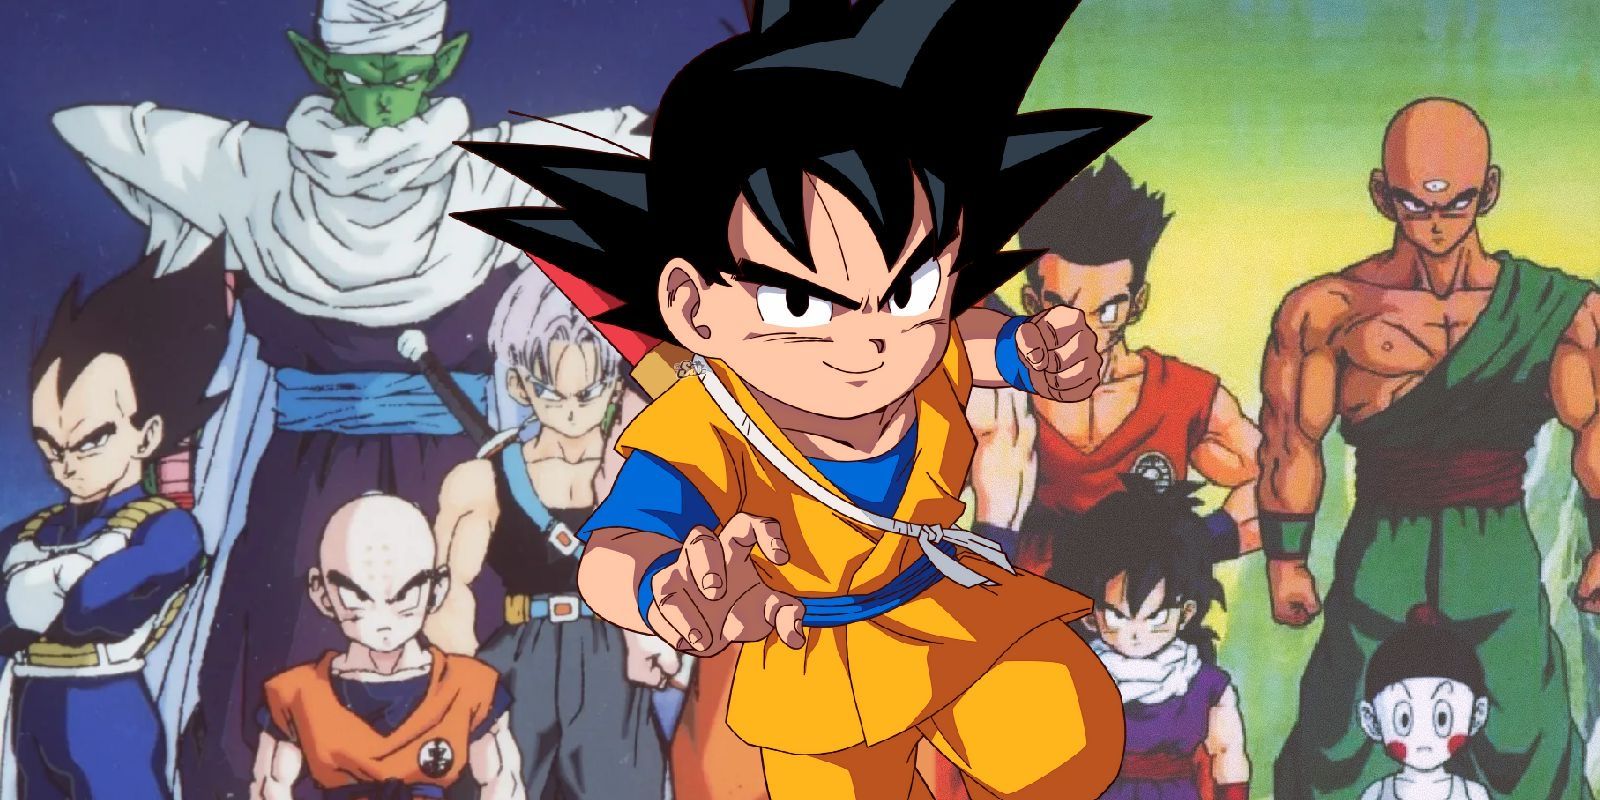 Goku in Dragon Ball Daima with the cast of Dragon Ball Z